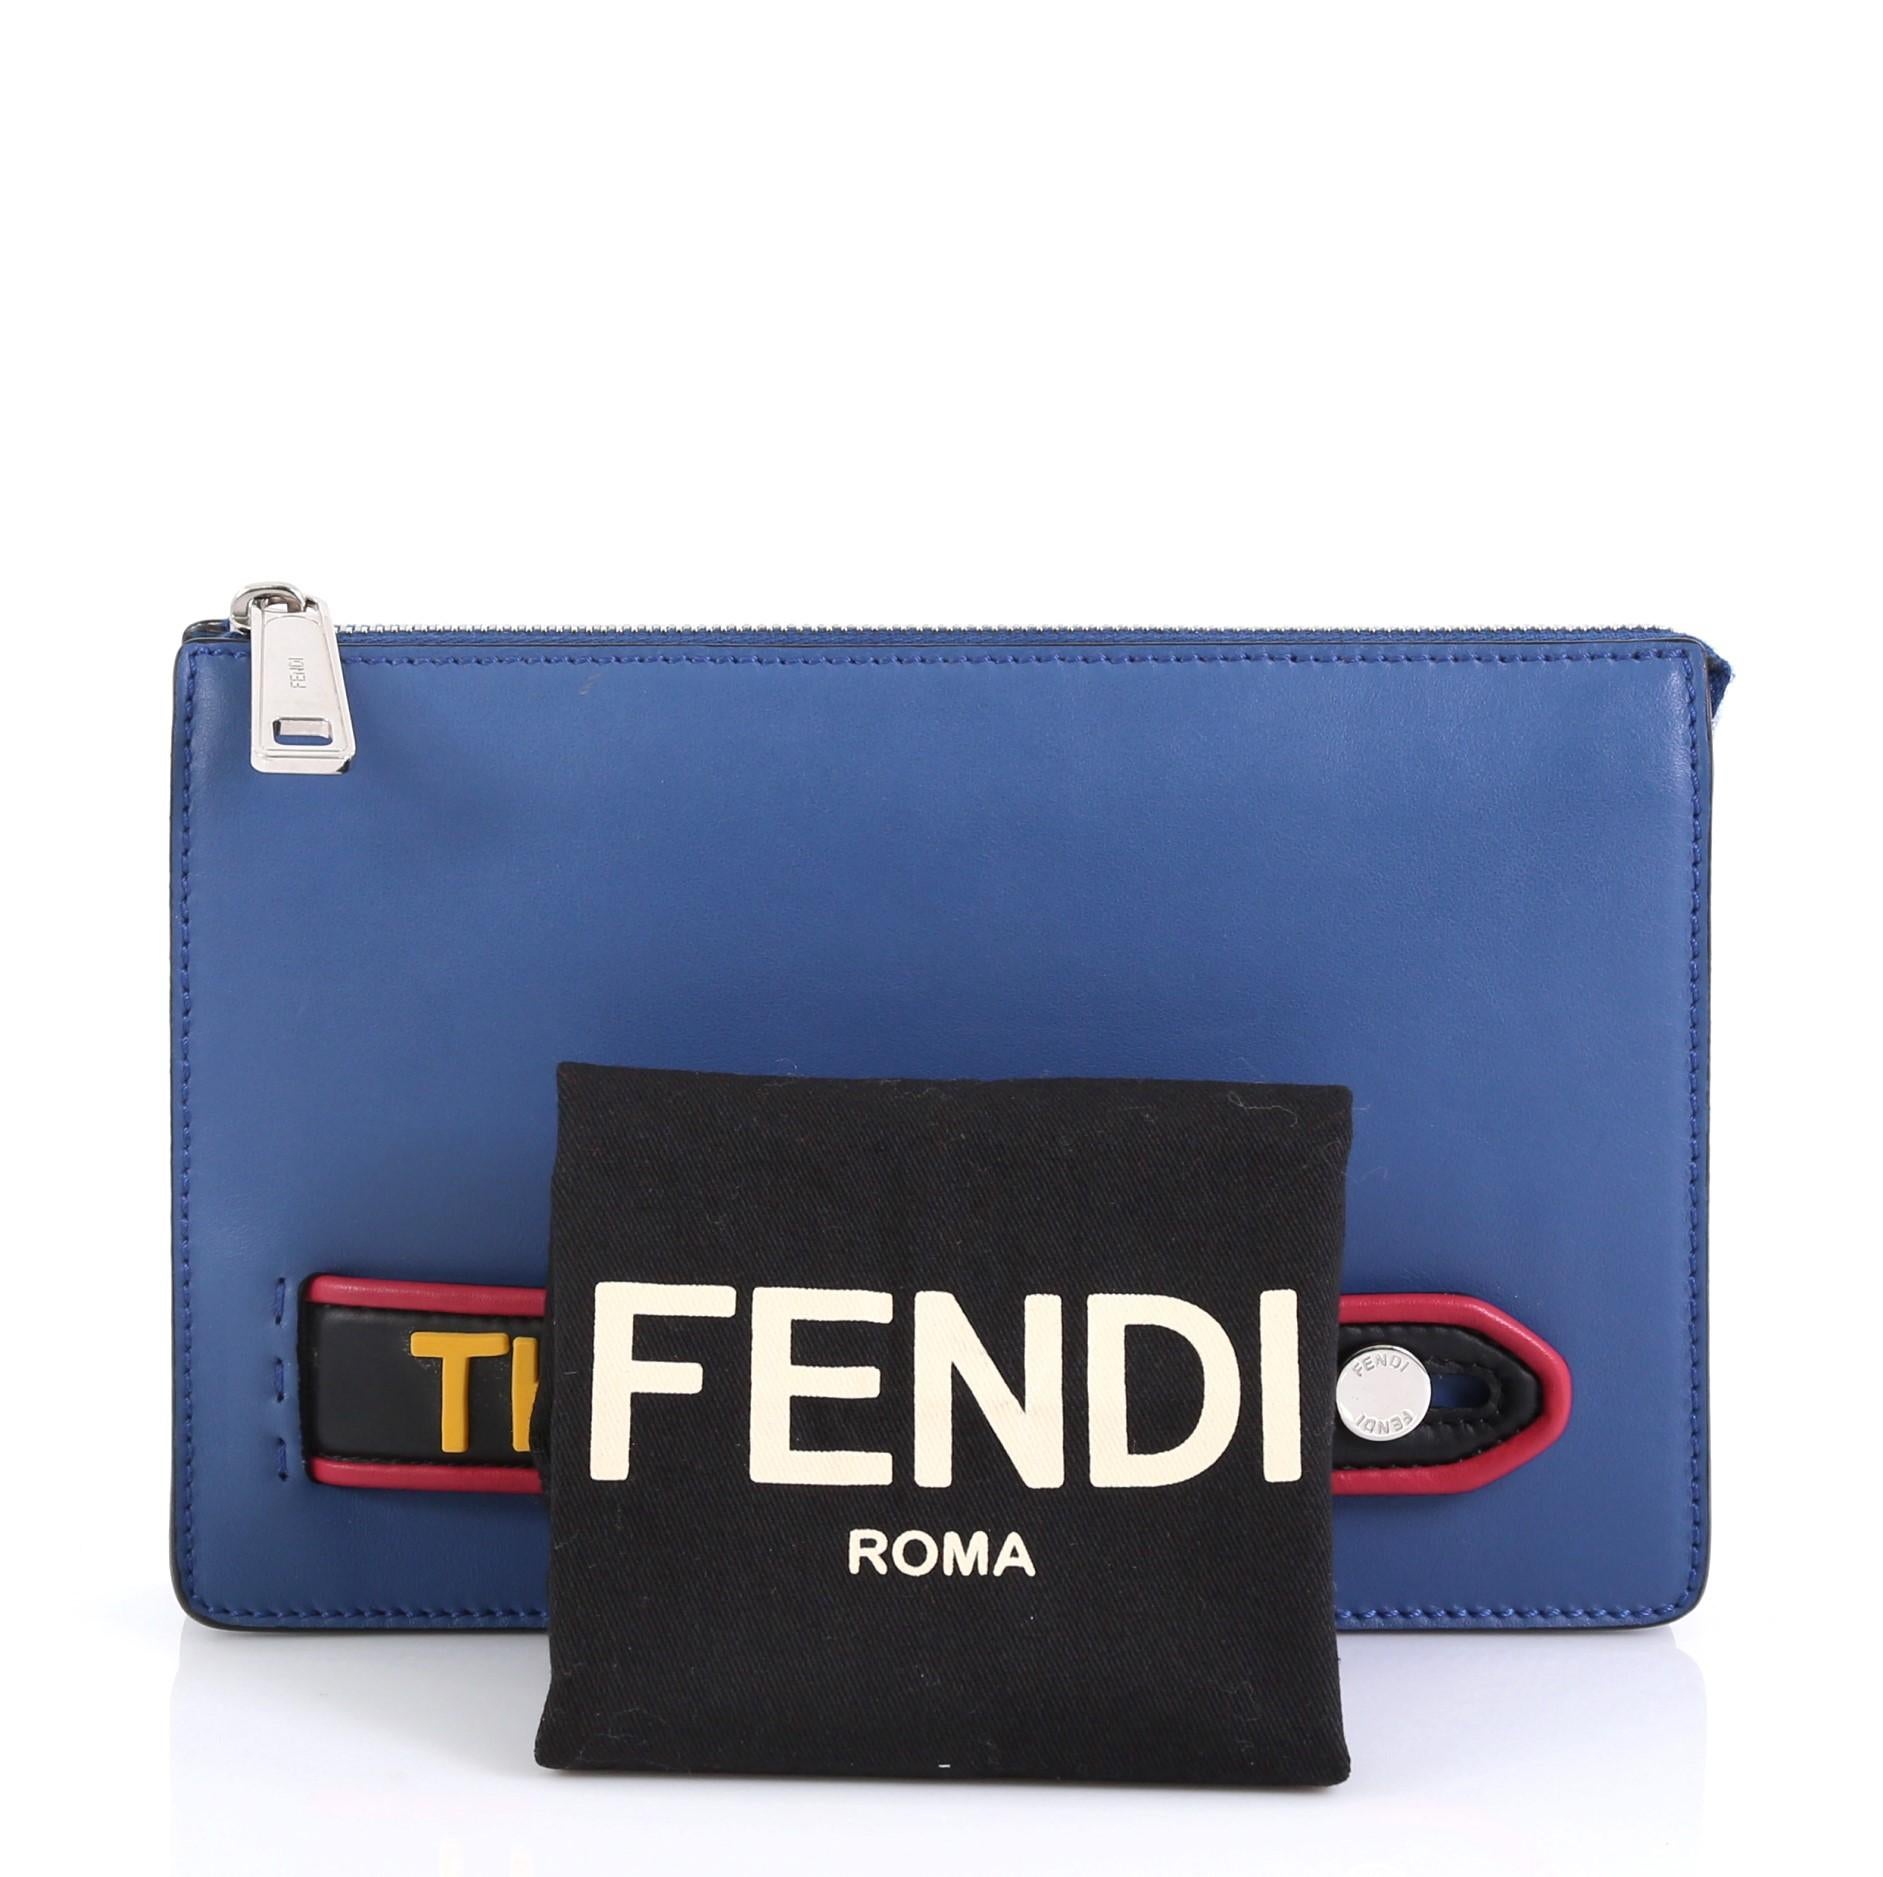 This Fendi Vocabulary Pouch Inlaid Leather Small, crafted in blue leather, features a leather handle with raised 